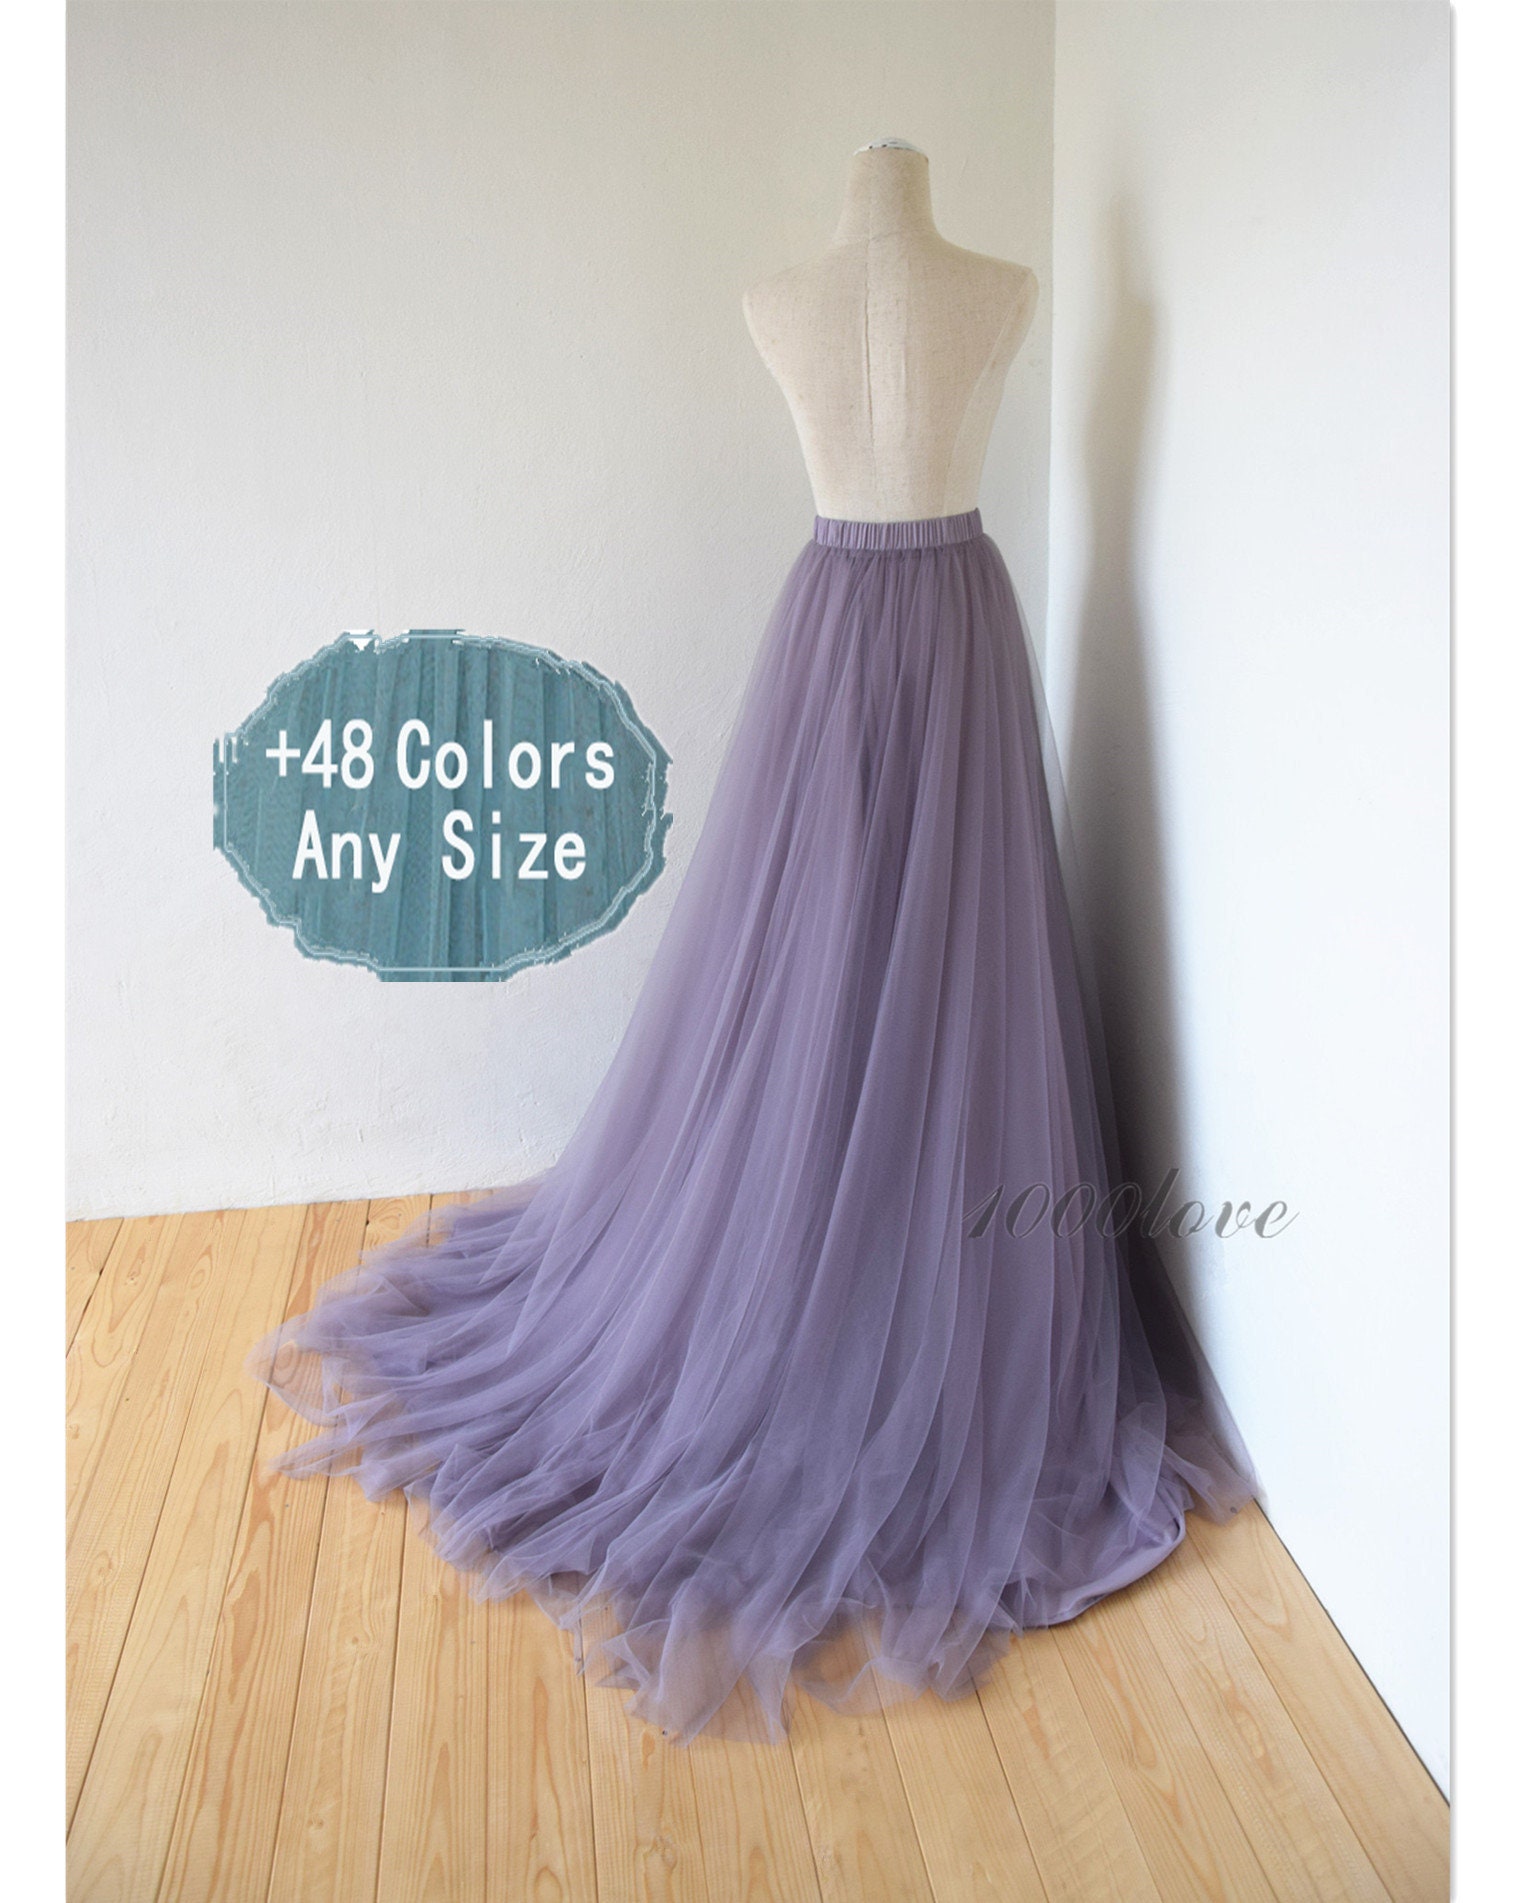 Adult Bride Softest Tulle Skirt, Long Maxi Skirt With A Train, Evening Bridesmaid Dress, Photo Shoot